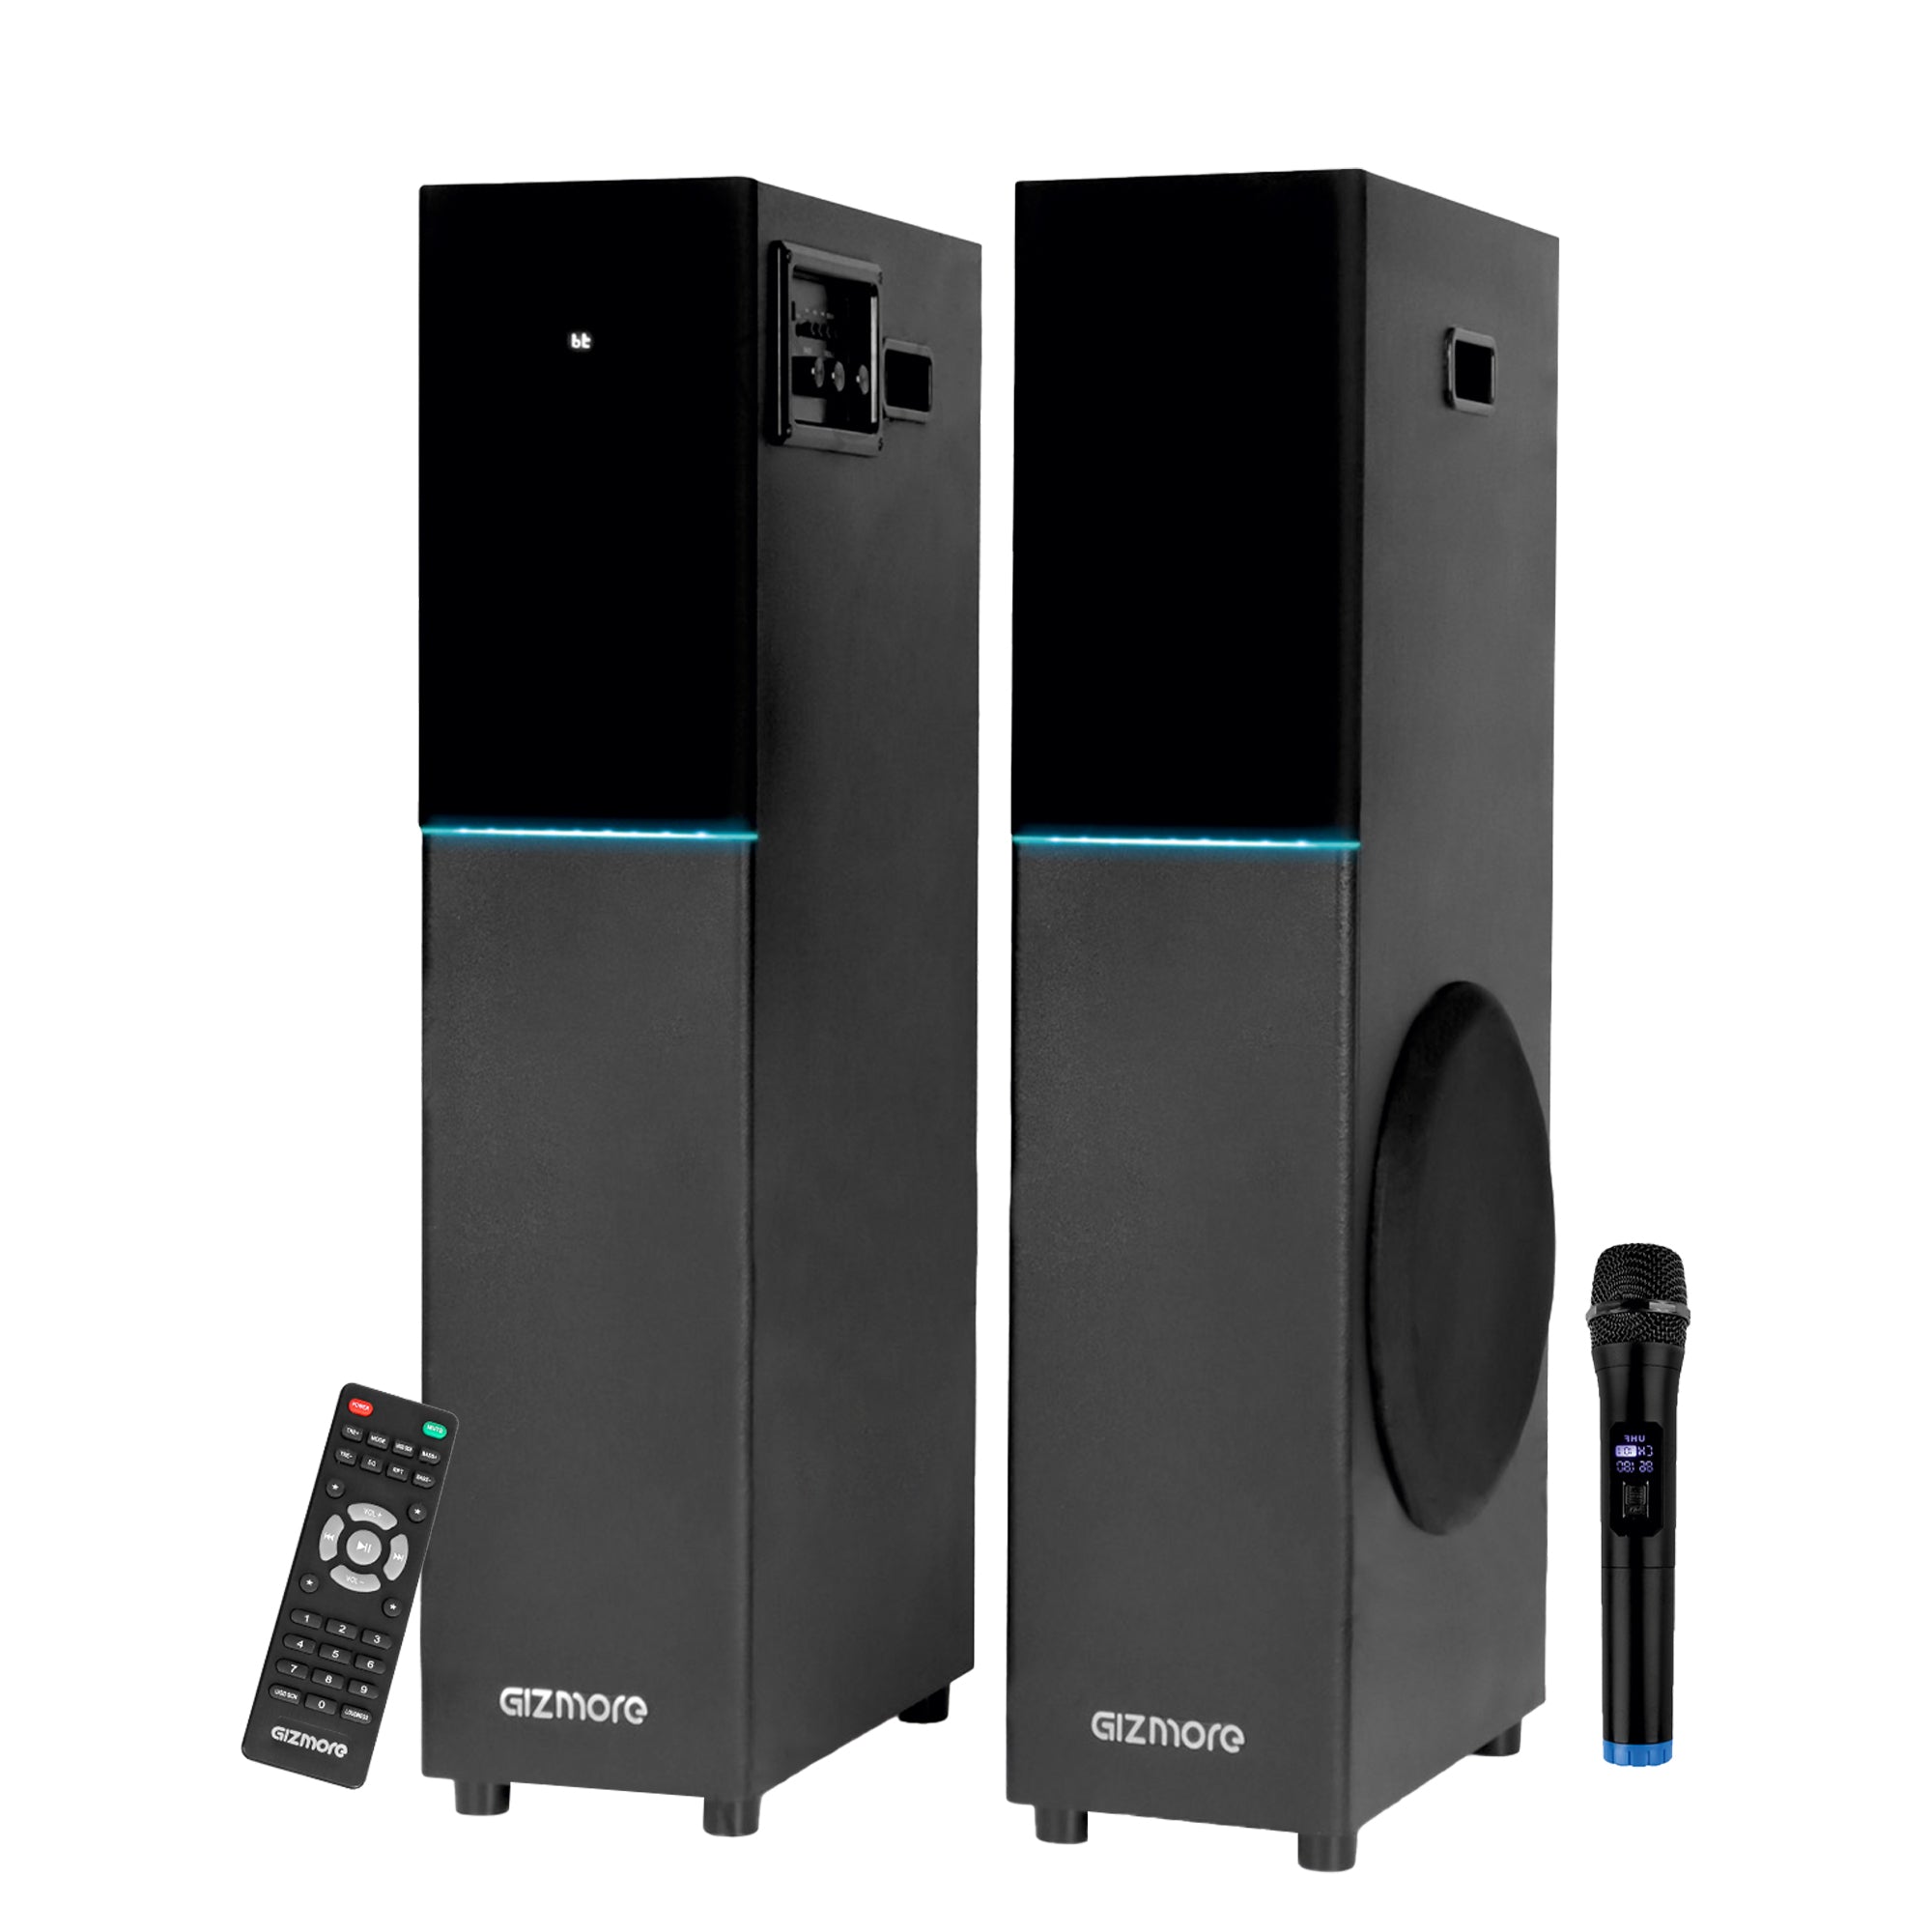 GIZMORE DT11500 120W Dual Tower Wooden Speaker with UHF Wireless MIC, Digital LED Display & RGB Lights, Volume & Bass Control, Karaoke and Party Speaker with Multiple Connectivity